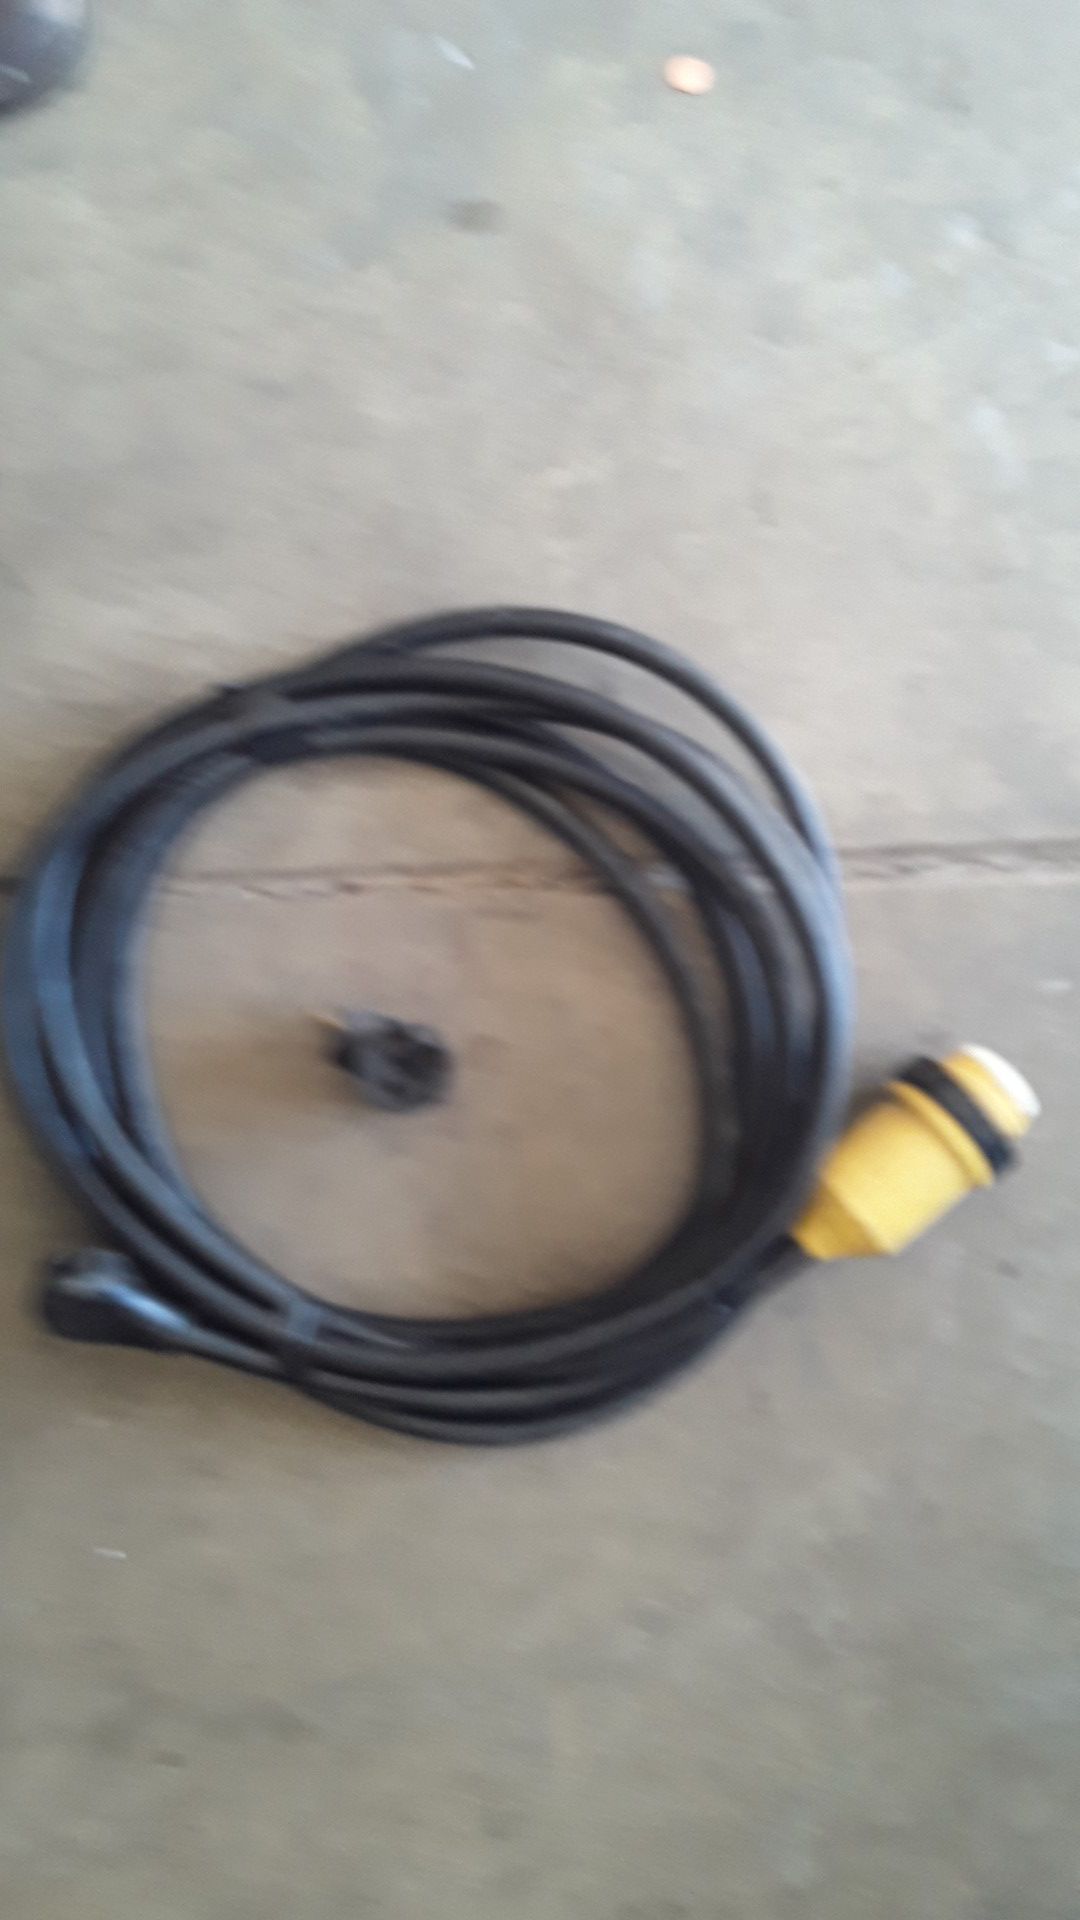 25' RV Power Cord 30 amp 125V with Rain tight twist lock and adapter.